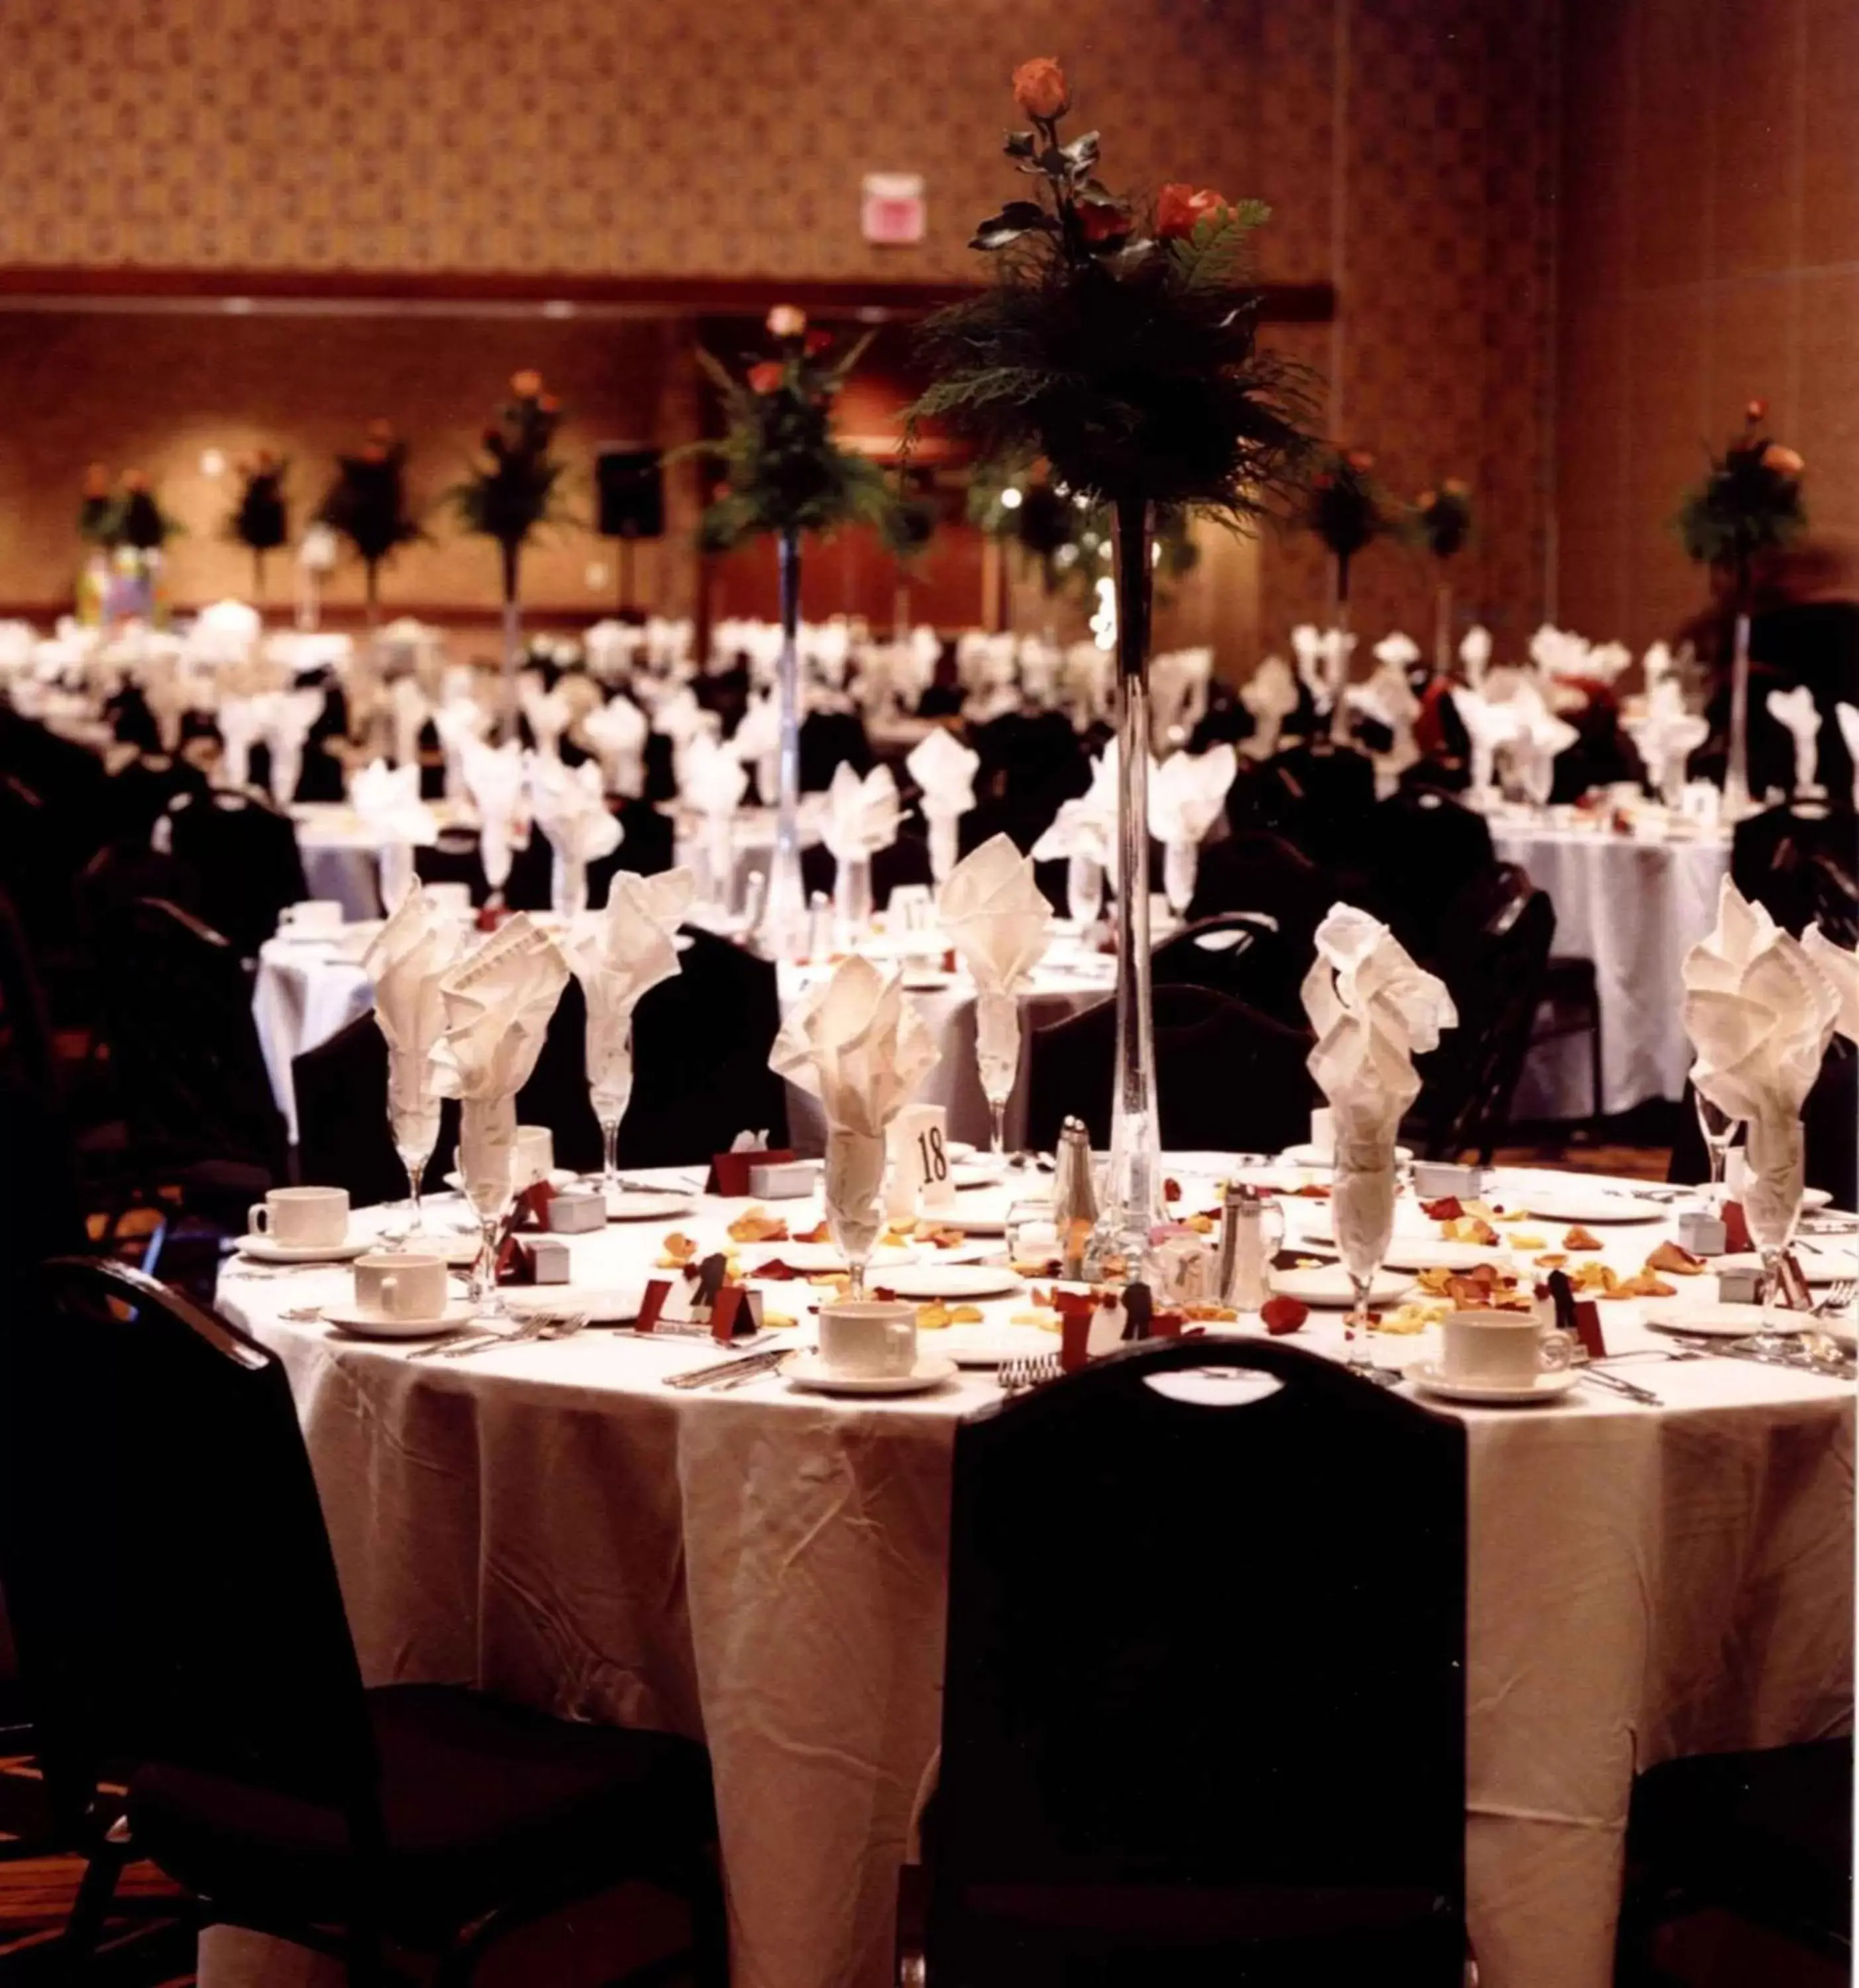 Banquet/Function facilities, Banquet Facilities in Radisson Hotel & Conference Center Green Bay